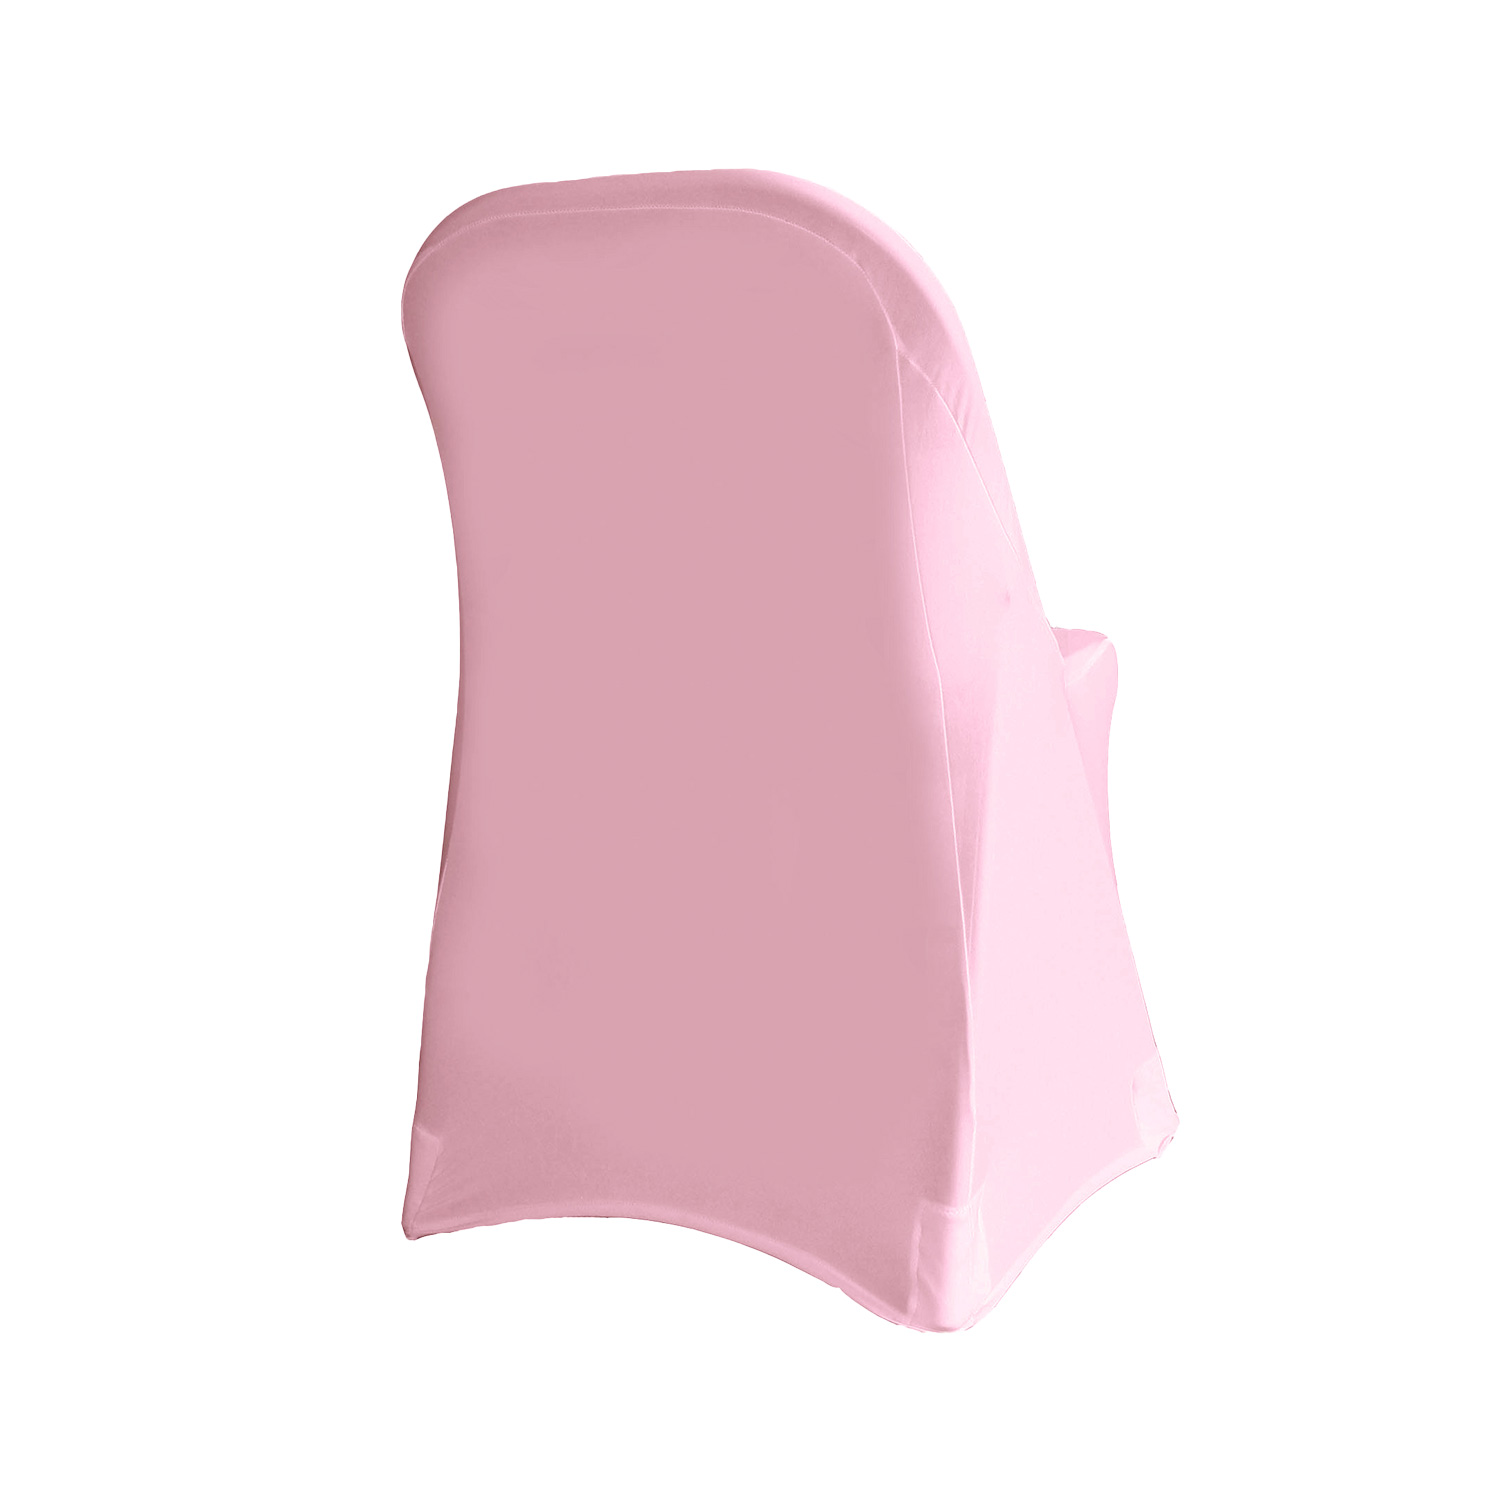 Your Chair Covers - Stretch Spandex Folding Chair Cover Pink for Wedding, Party, Birthday, Patio, etc. - image 2 of 3